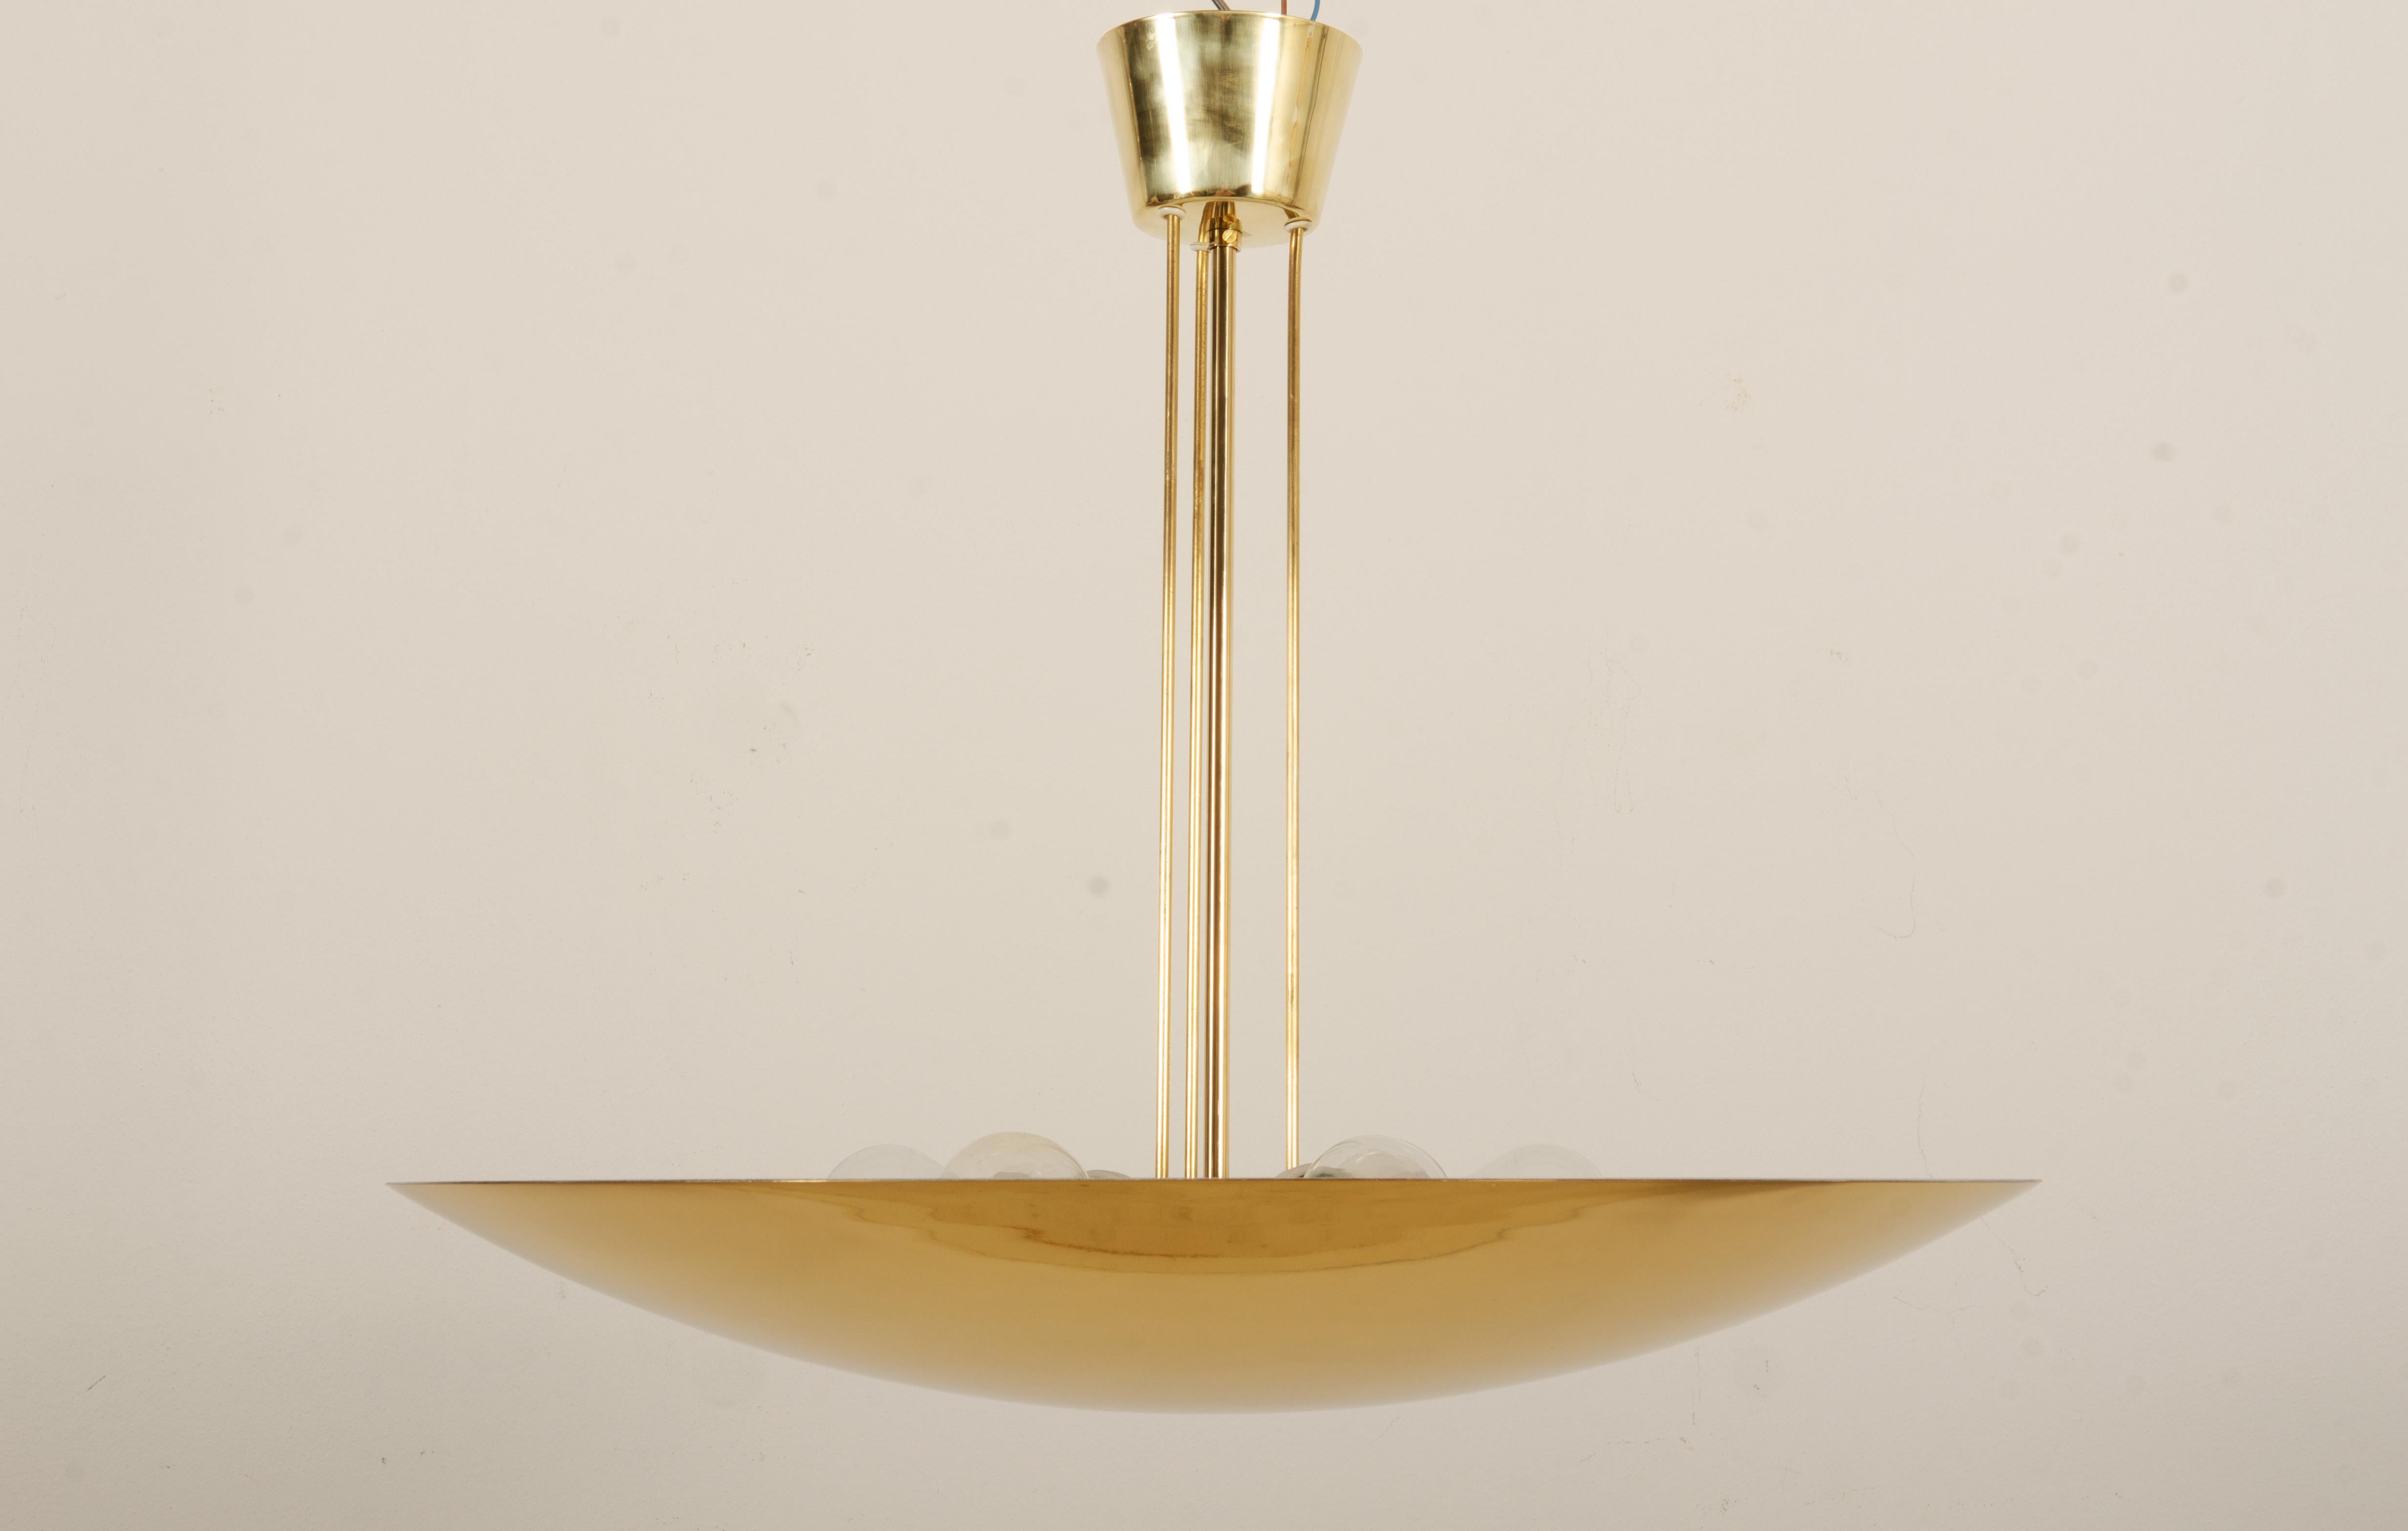 Brass dome lamp by J.T. Kalmar from the 1970s. Fitted with six E27 polcelain sockets and up to 100watts each. Excelent condition, repolished.
up to 2 pieces available, price per lamp